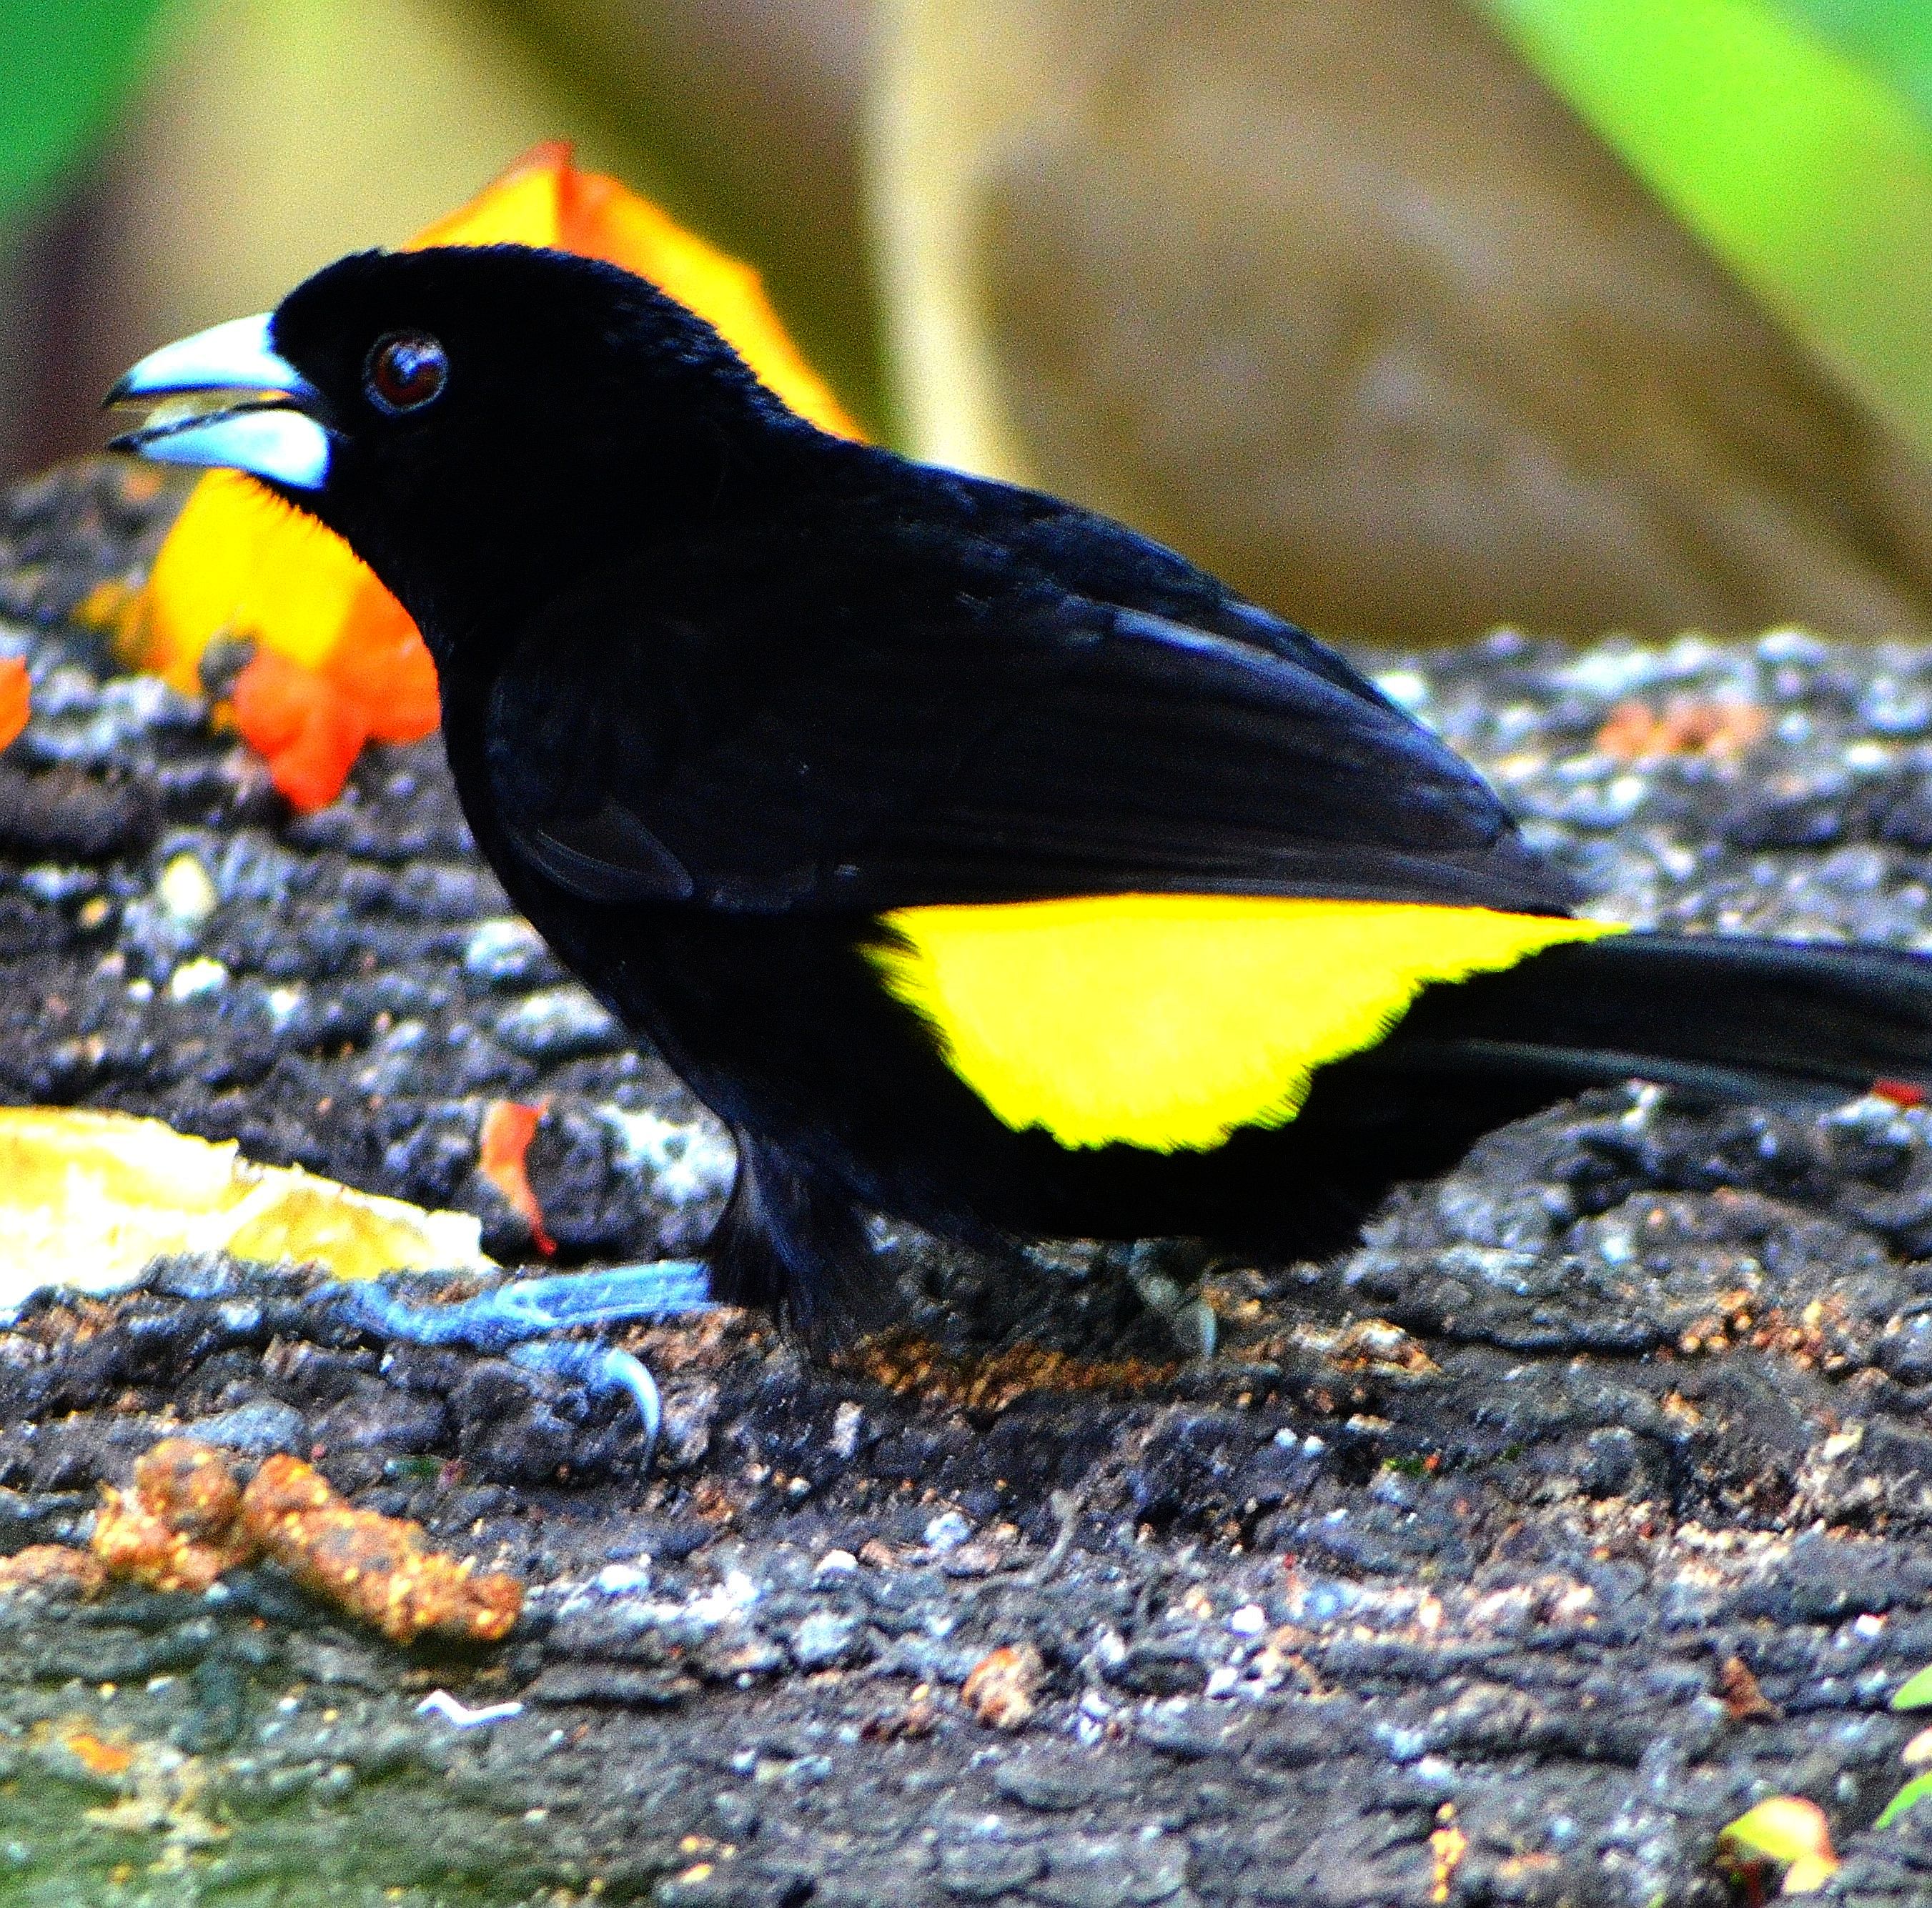 Some Common Beautiful Bird Species from Panama